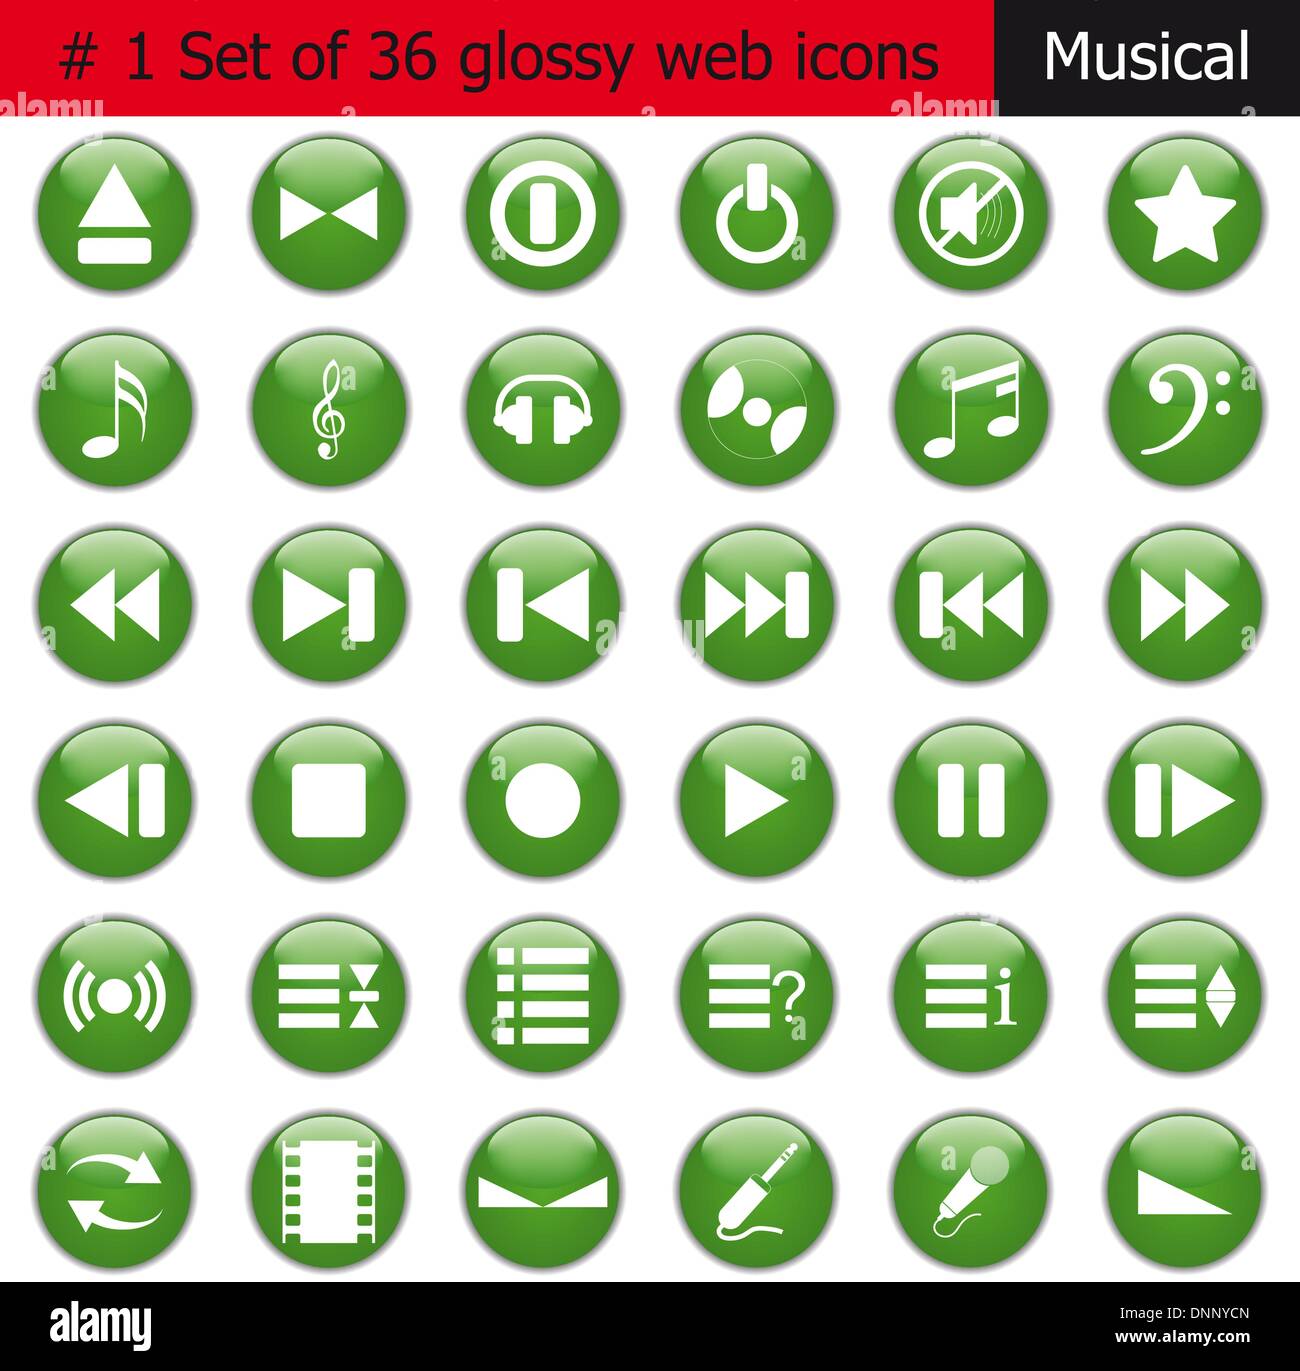 Collection of different icons for using in web design. Set #1. Music. Stock Vector